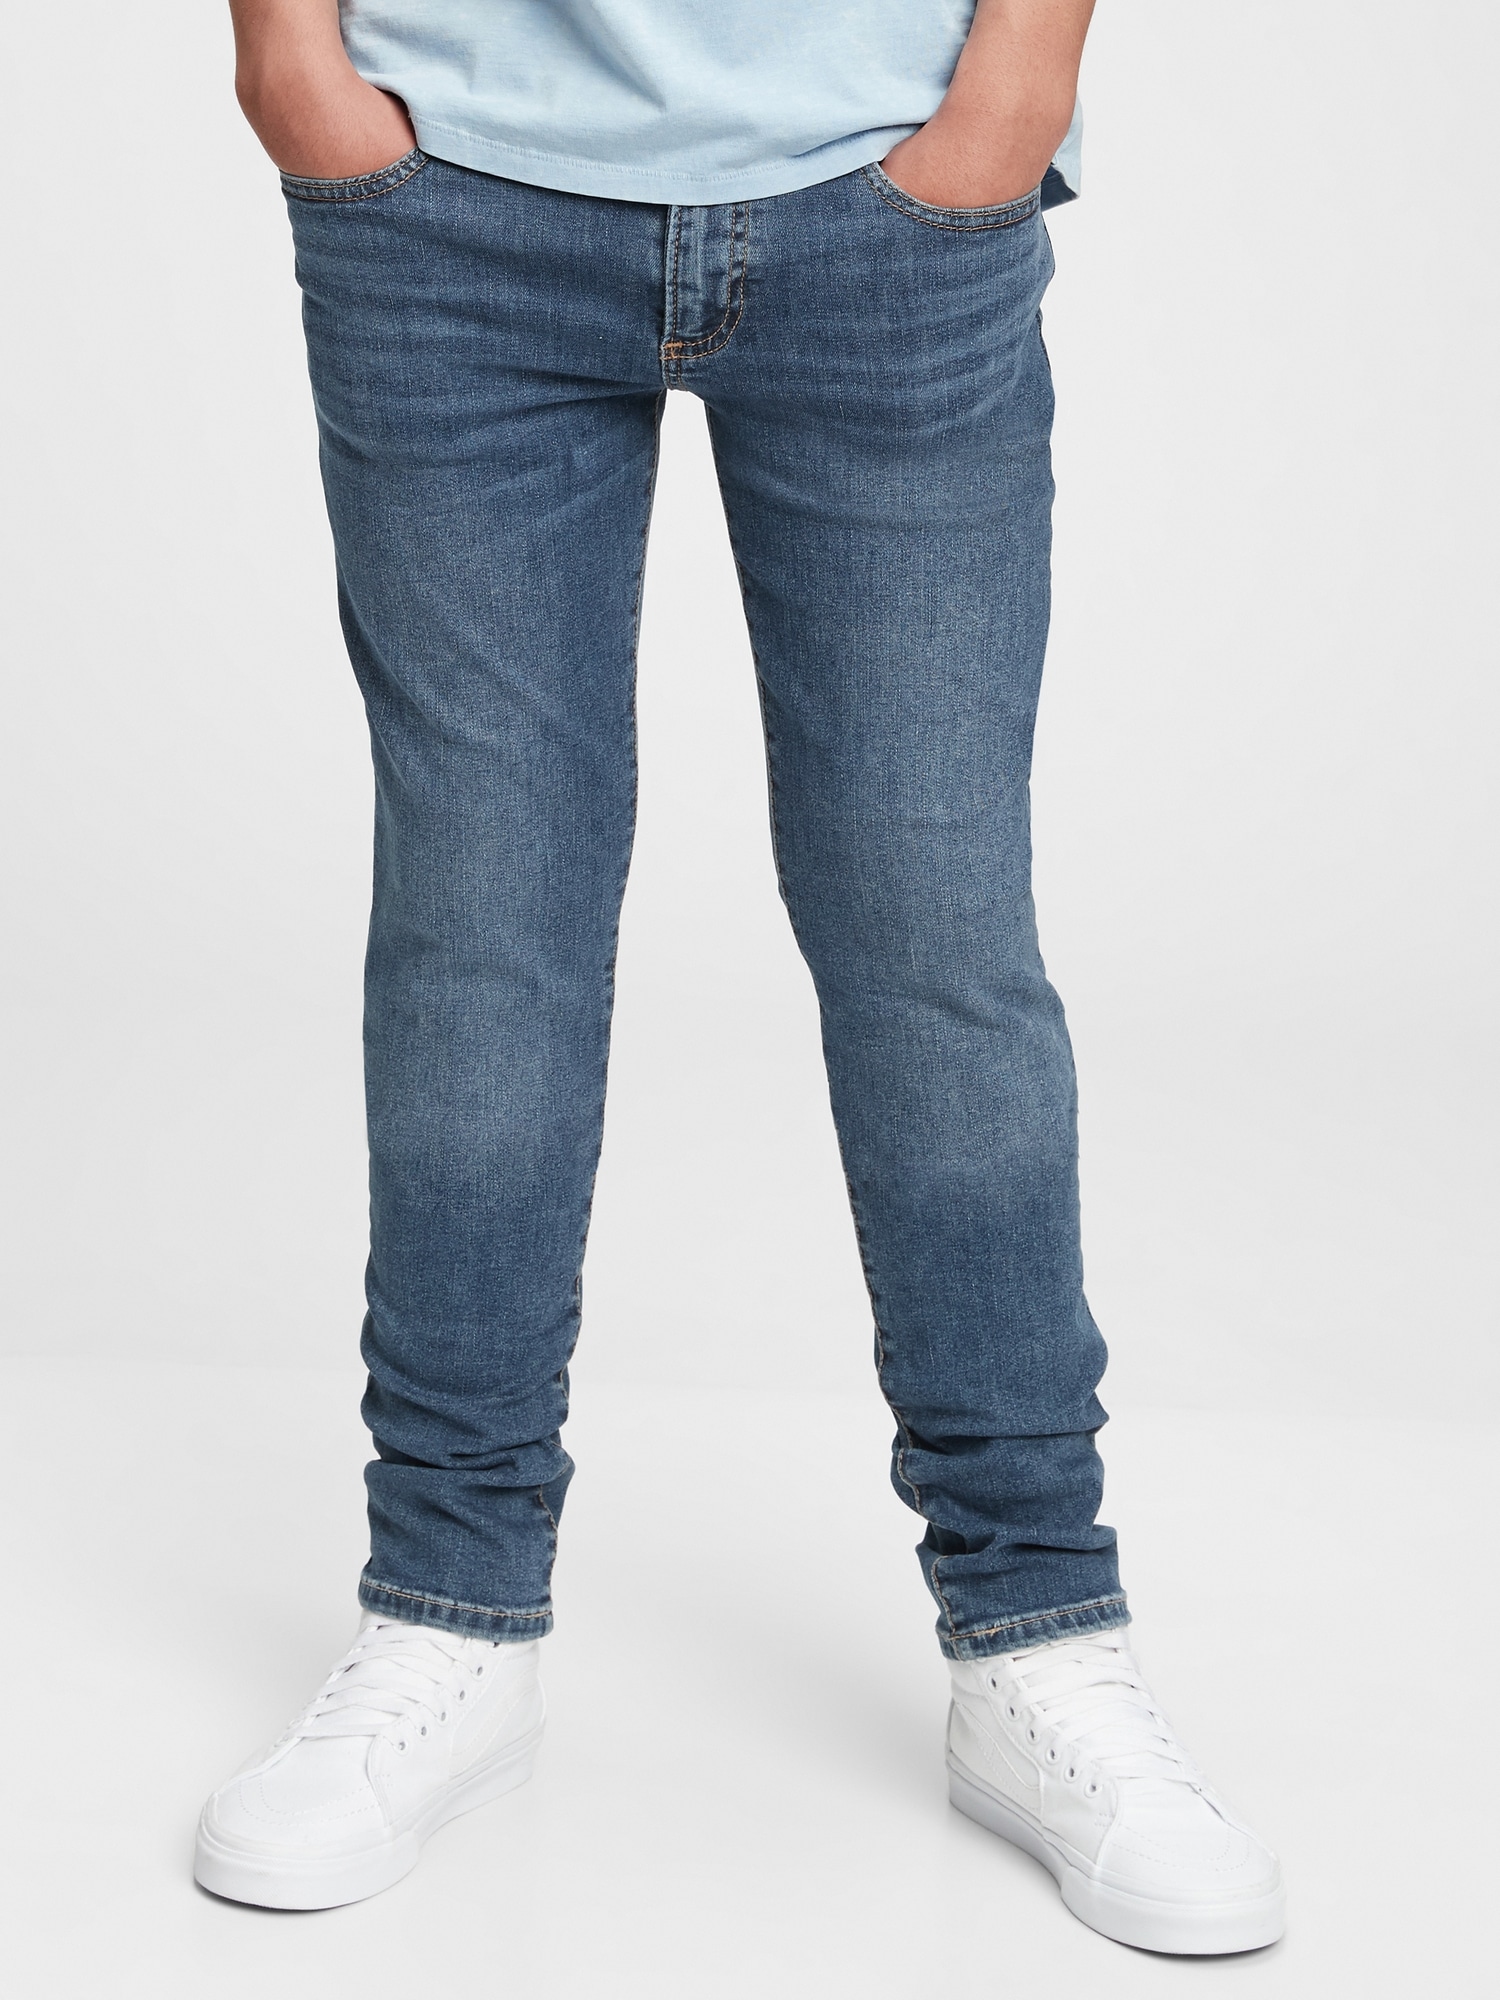 Stacked Washwell™ Gap | with Jeans Ankle Teen Skinny